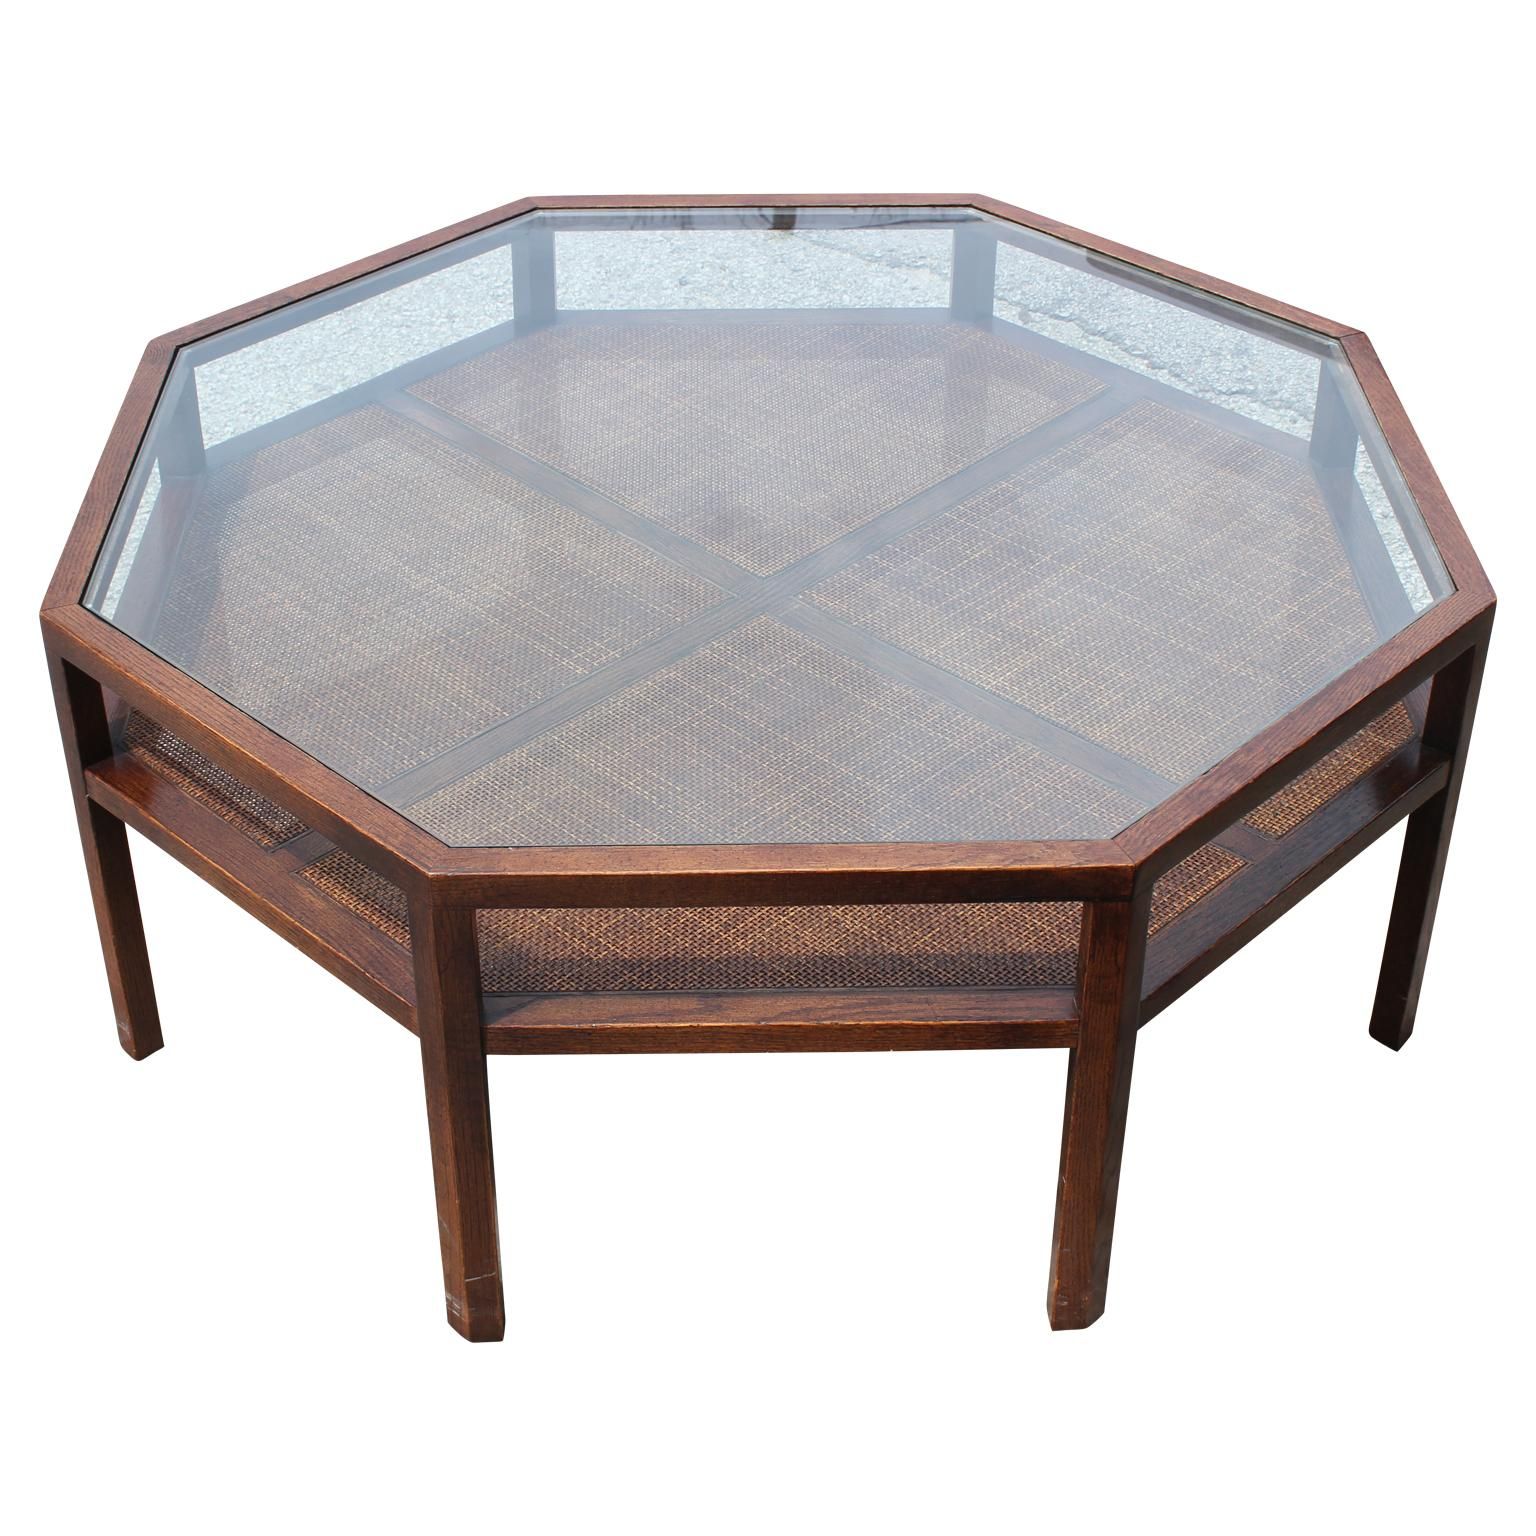 Modern Octagon Or Round Walnut Coffee Table With Glass Top At 1stdibs Intended For Octagon Glass Top Coffee Tables (View 6 of 15)